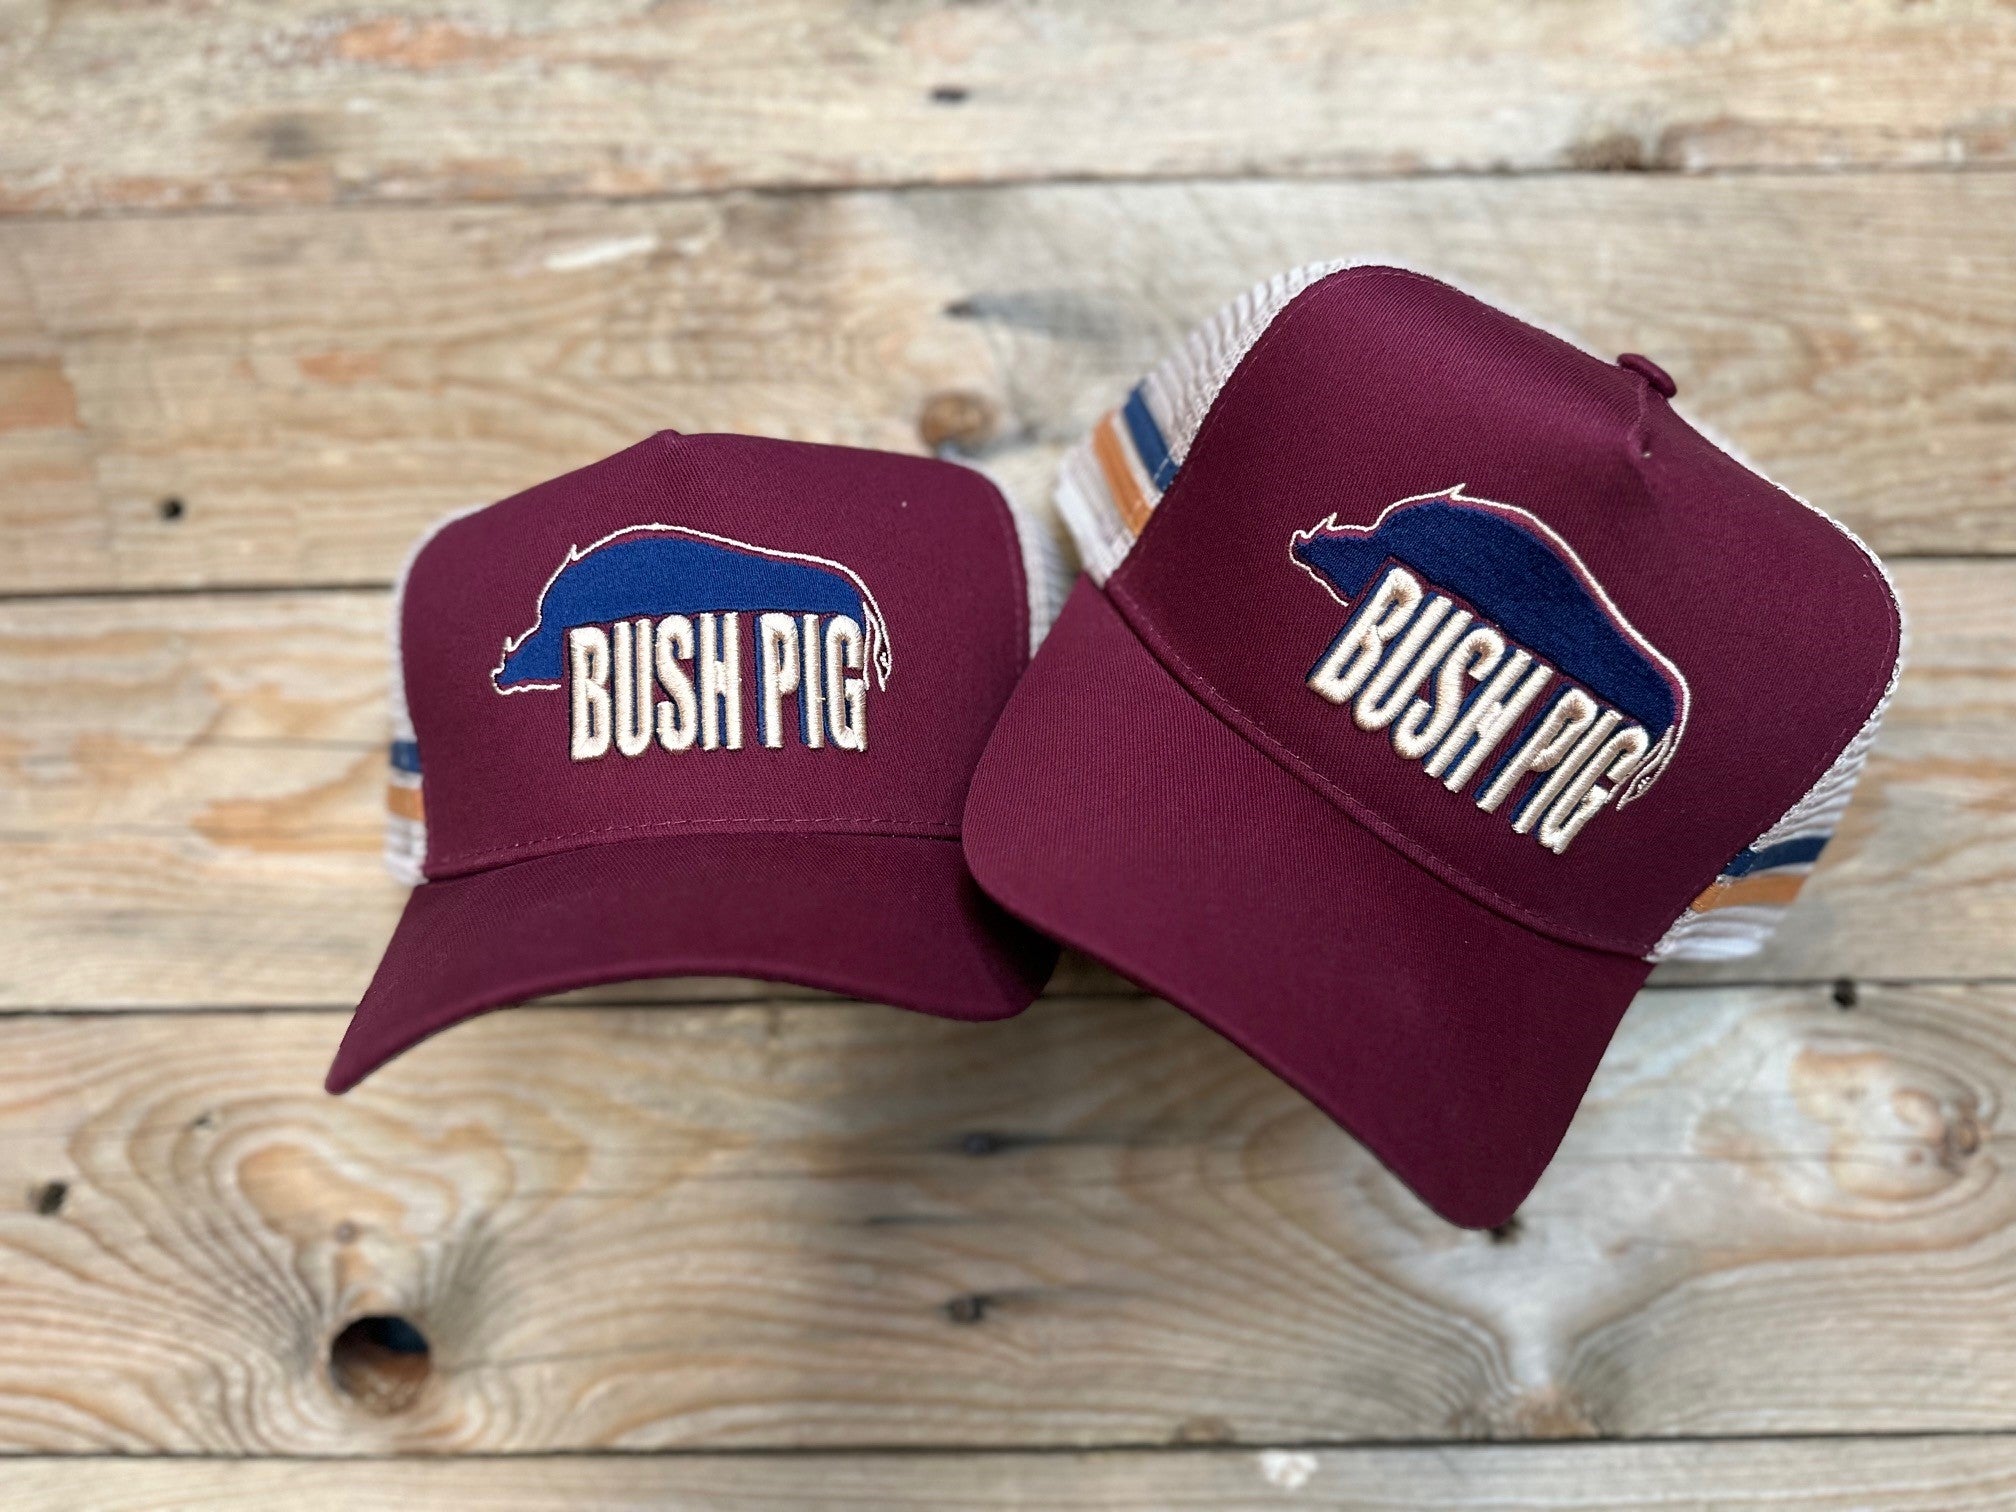 Debs Country Outfitters Bush Pig Trucker Cap (7167787499597)